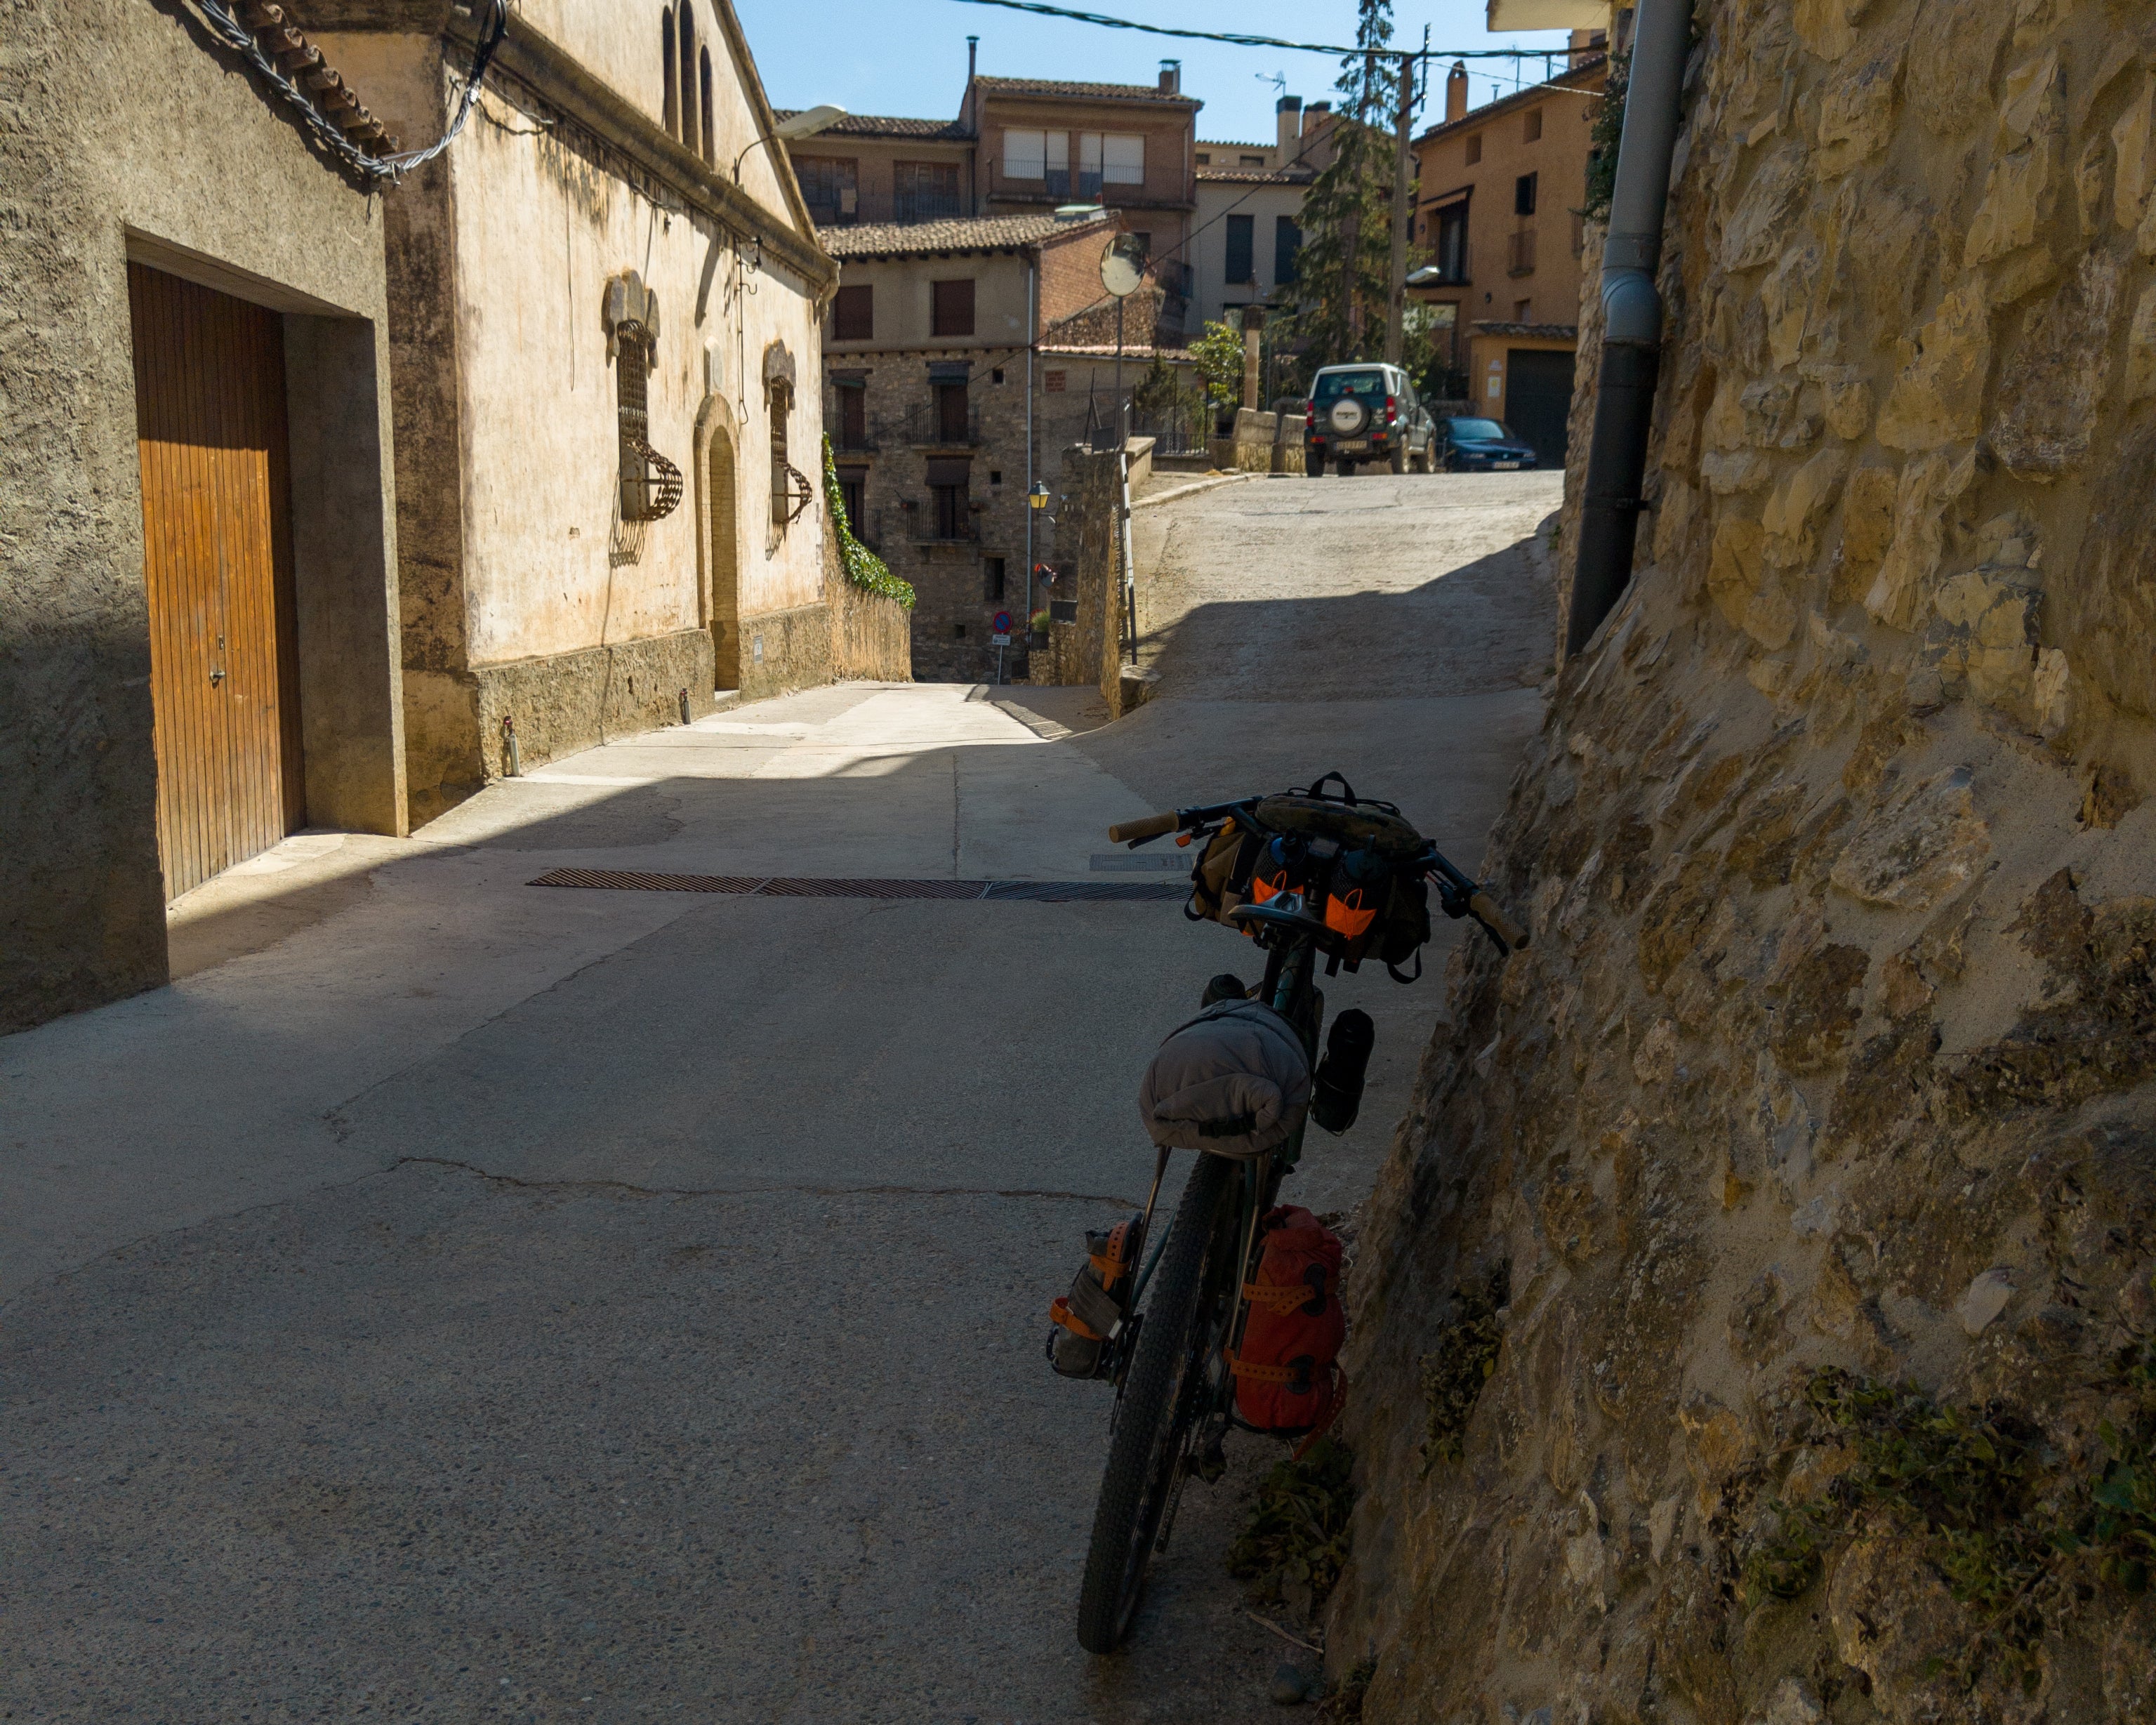 Bikepacking the Sierra of Montsec, Catalonia by Andrei Turro